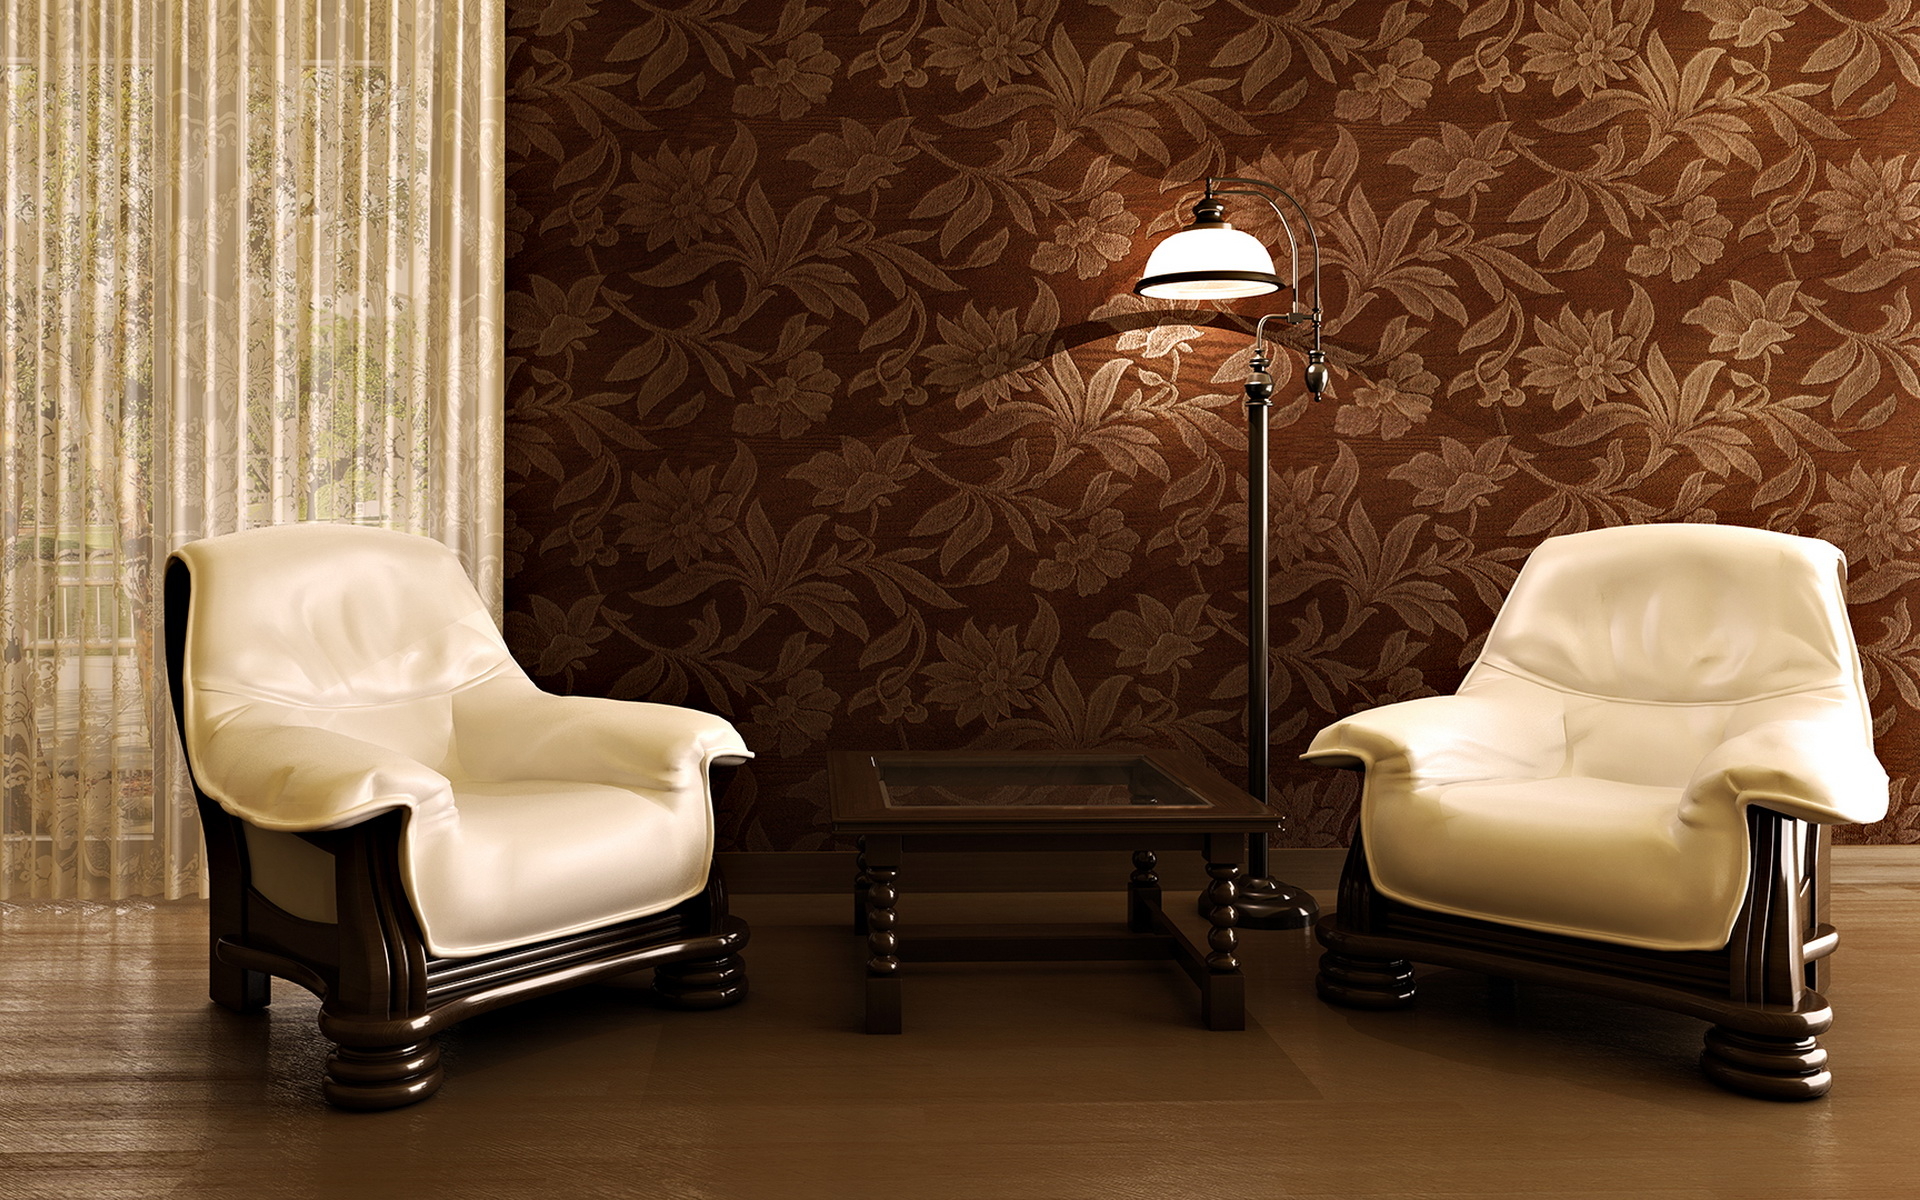 Simple Classy Wallpaper Designs For Living Room